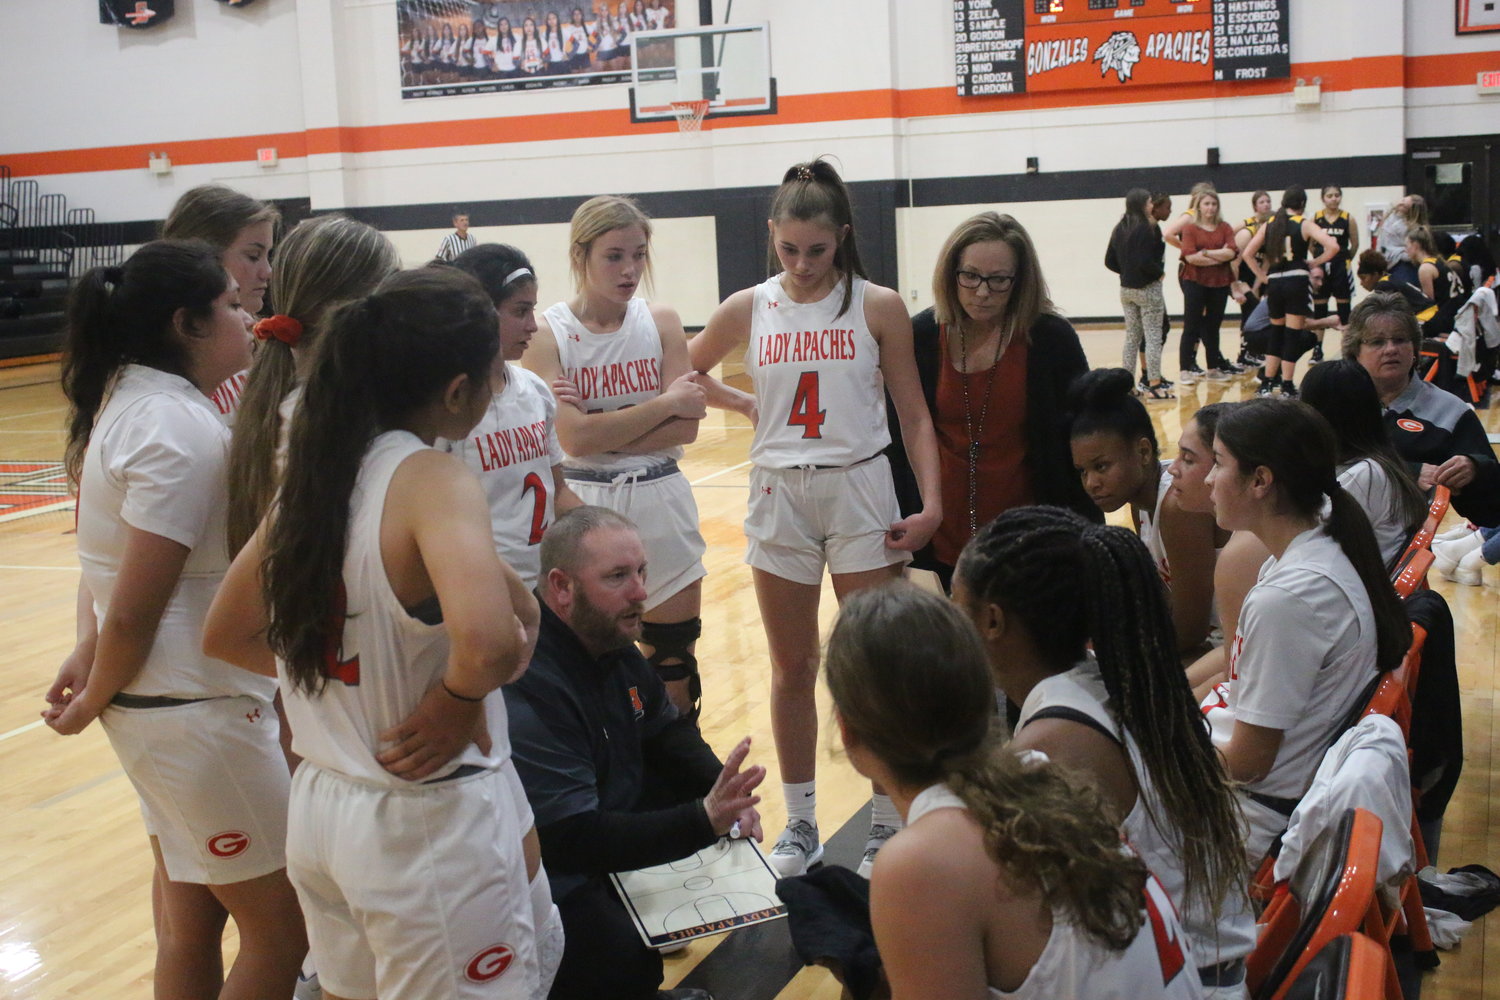 Coach Michael Fowler speaks to his team during a timeout against Sealy at home. The Lady Apaches lost to the Mathis Lady Pirates on Friday, Dec. 10, on the road.